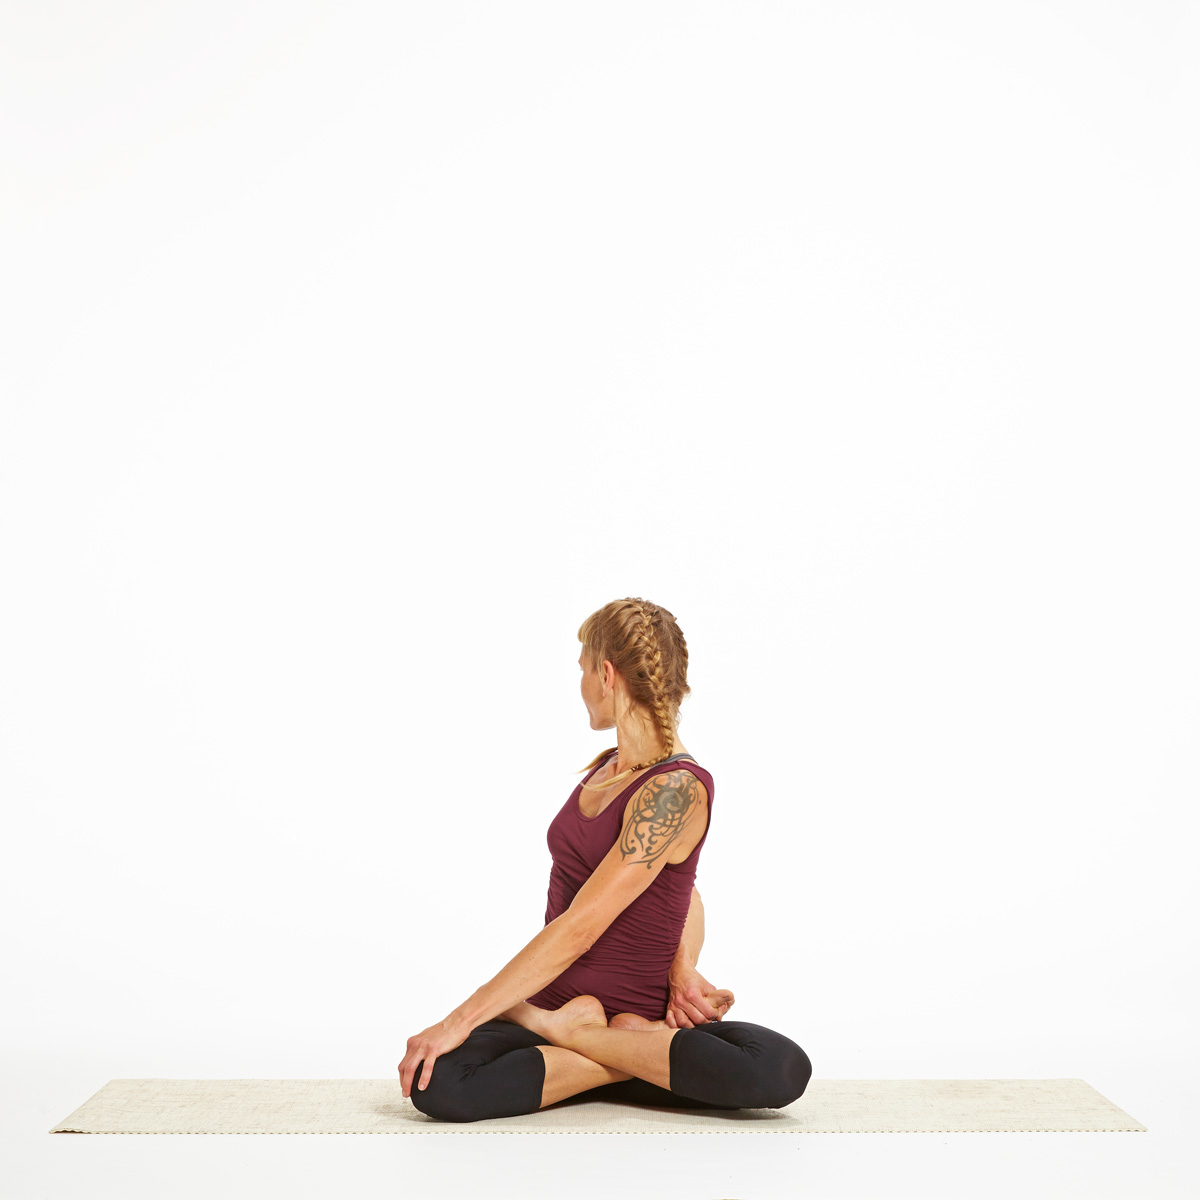 Everything You Need to Know When Beginning Yoga